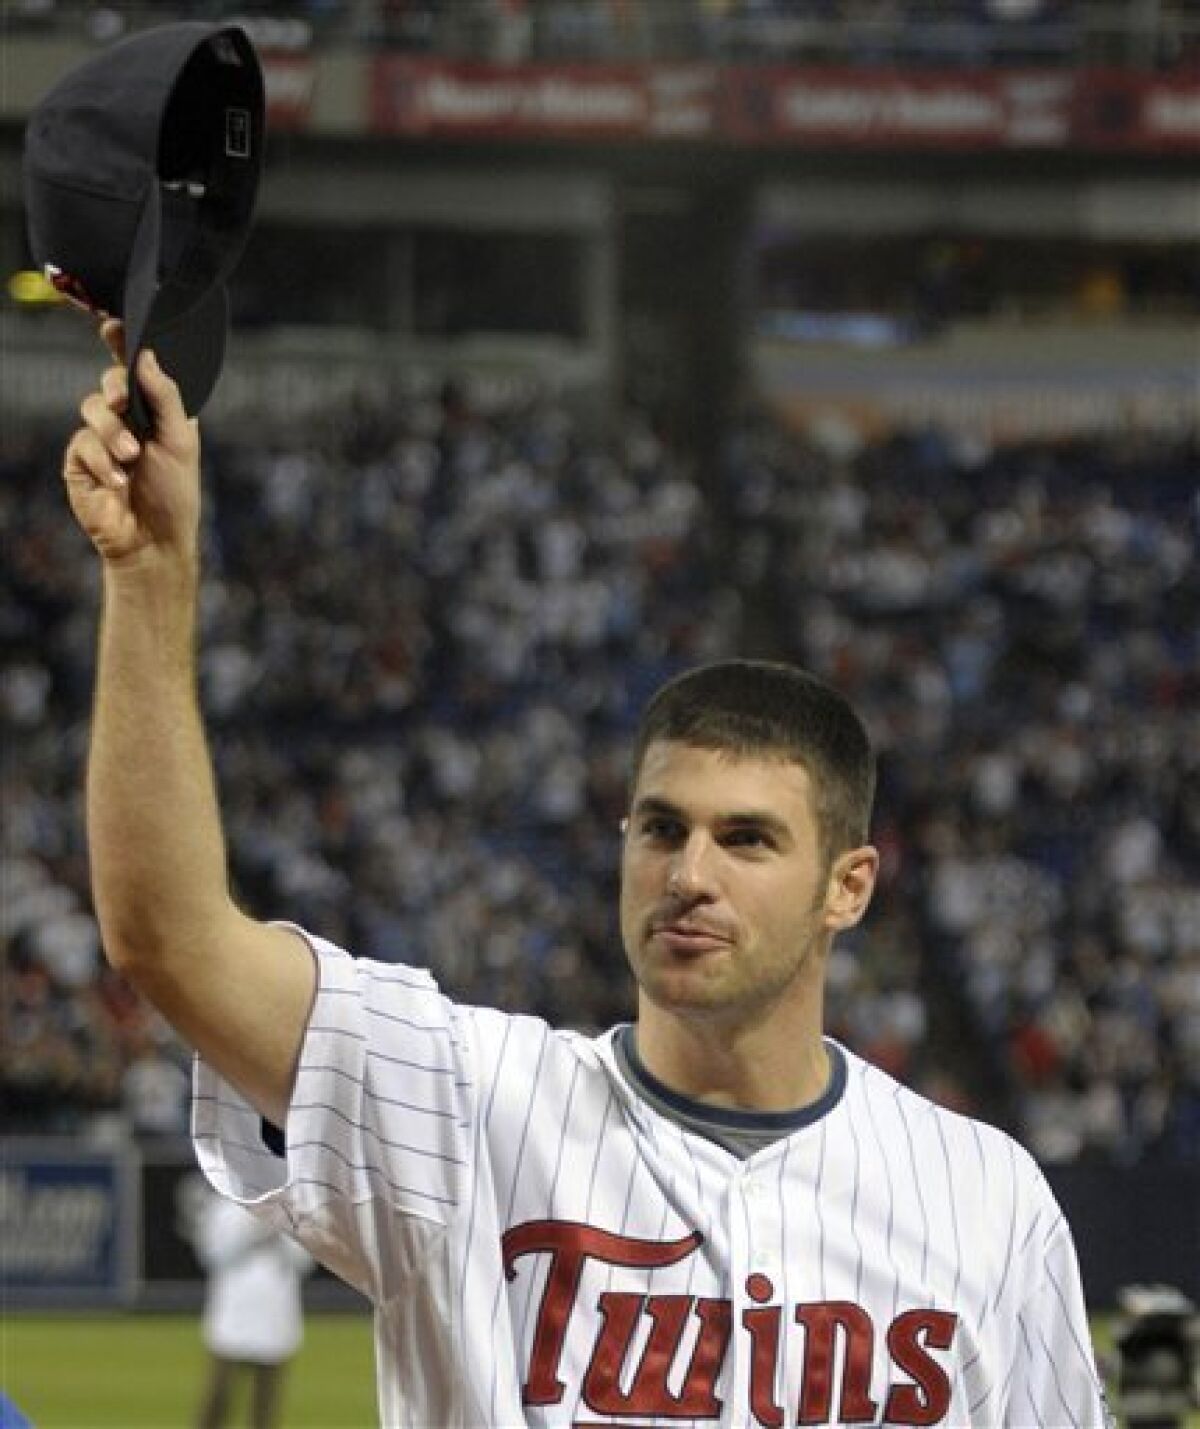 FILE - This is an Oct. 4, 2009, file photo showing Minnesota Twins catcher Joe Mauer acknowledges the crowd before a baseball game, in Minneapolis. Mauer has become only the second catcher in 33 years to win the American League Most Valuable Player Award, Monday, Nov. 23, 2009.(AP Photo/Tom Olmscheid, File)